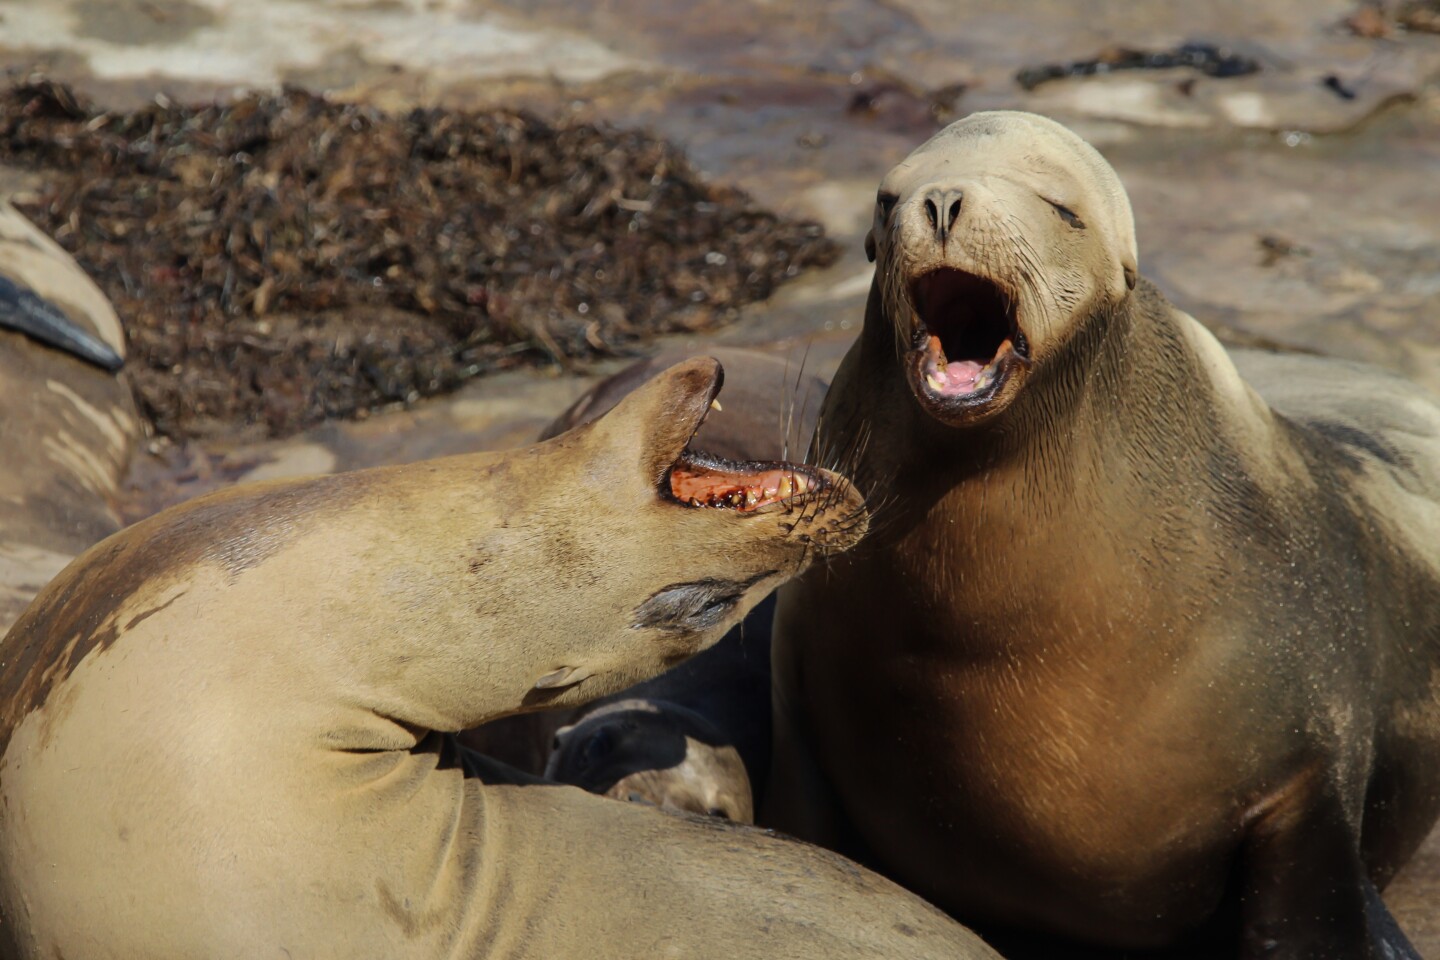 We would love to have heard the joke that had these sea lions in stitches at La Jolla Cove.